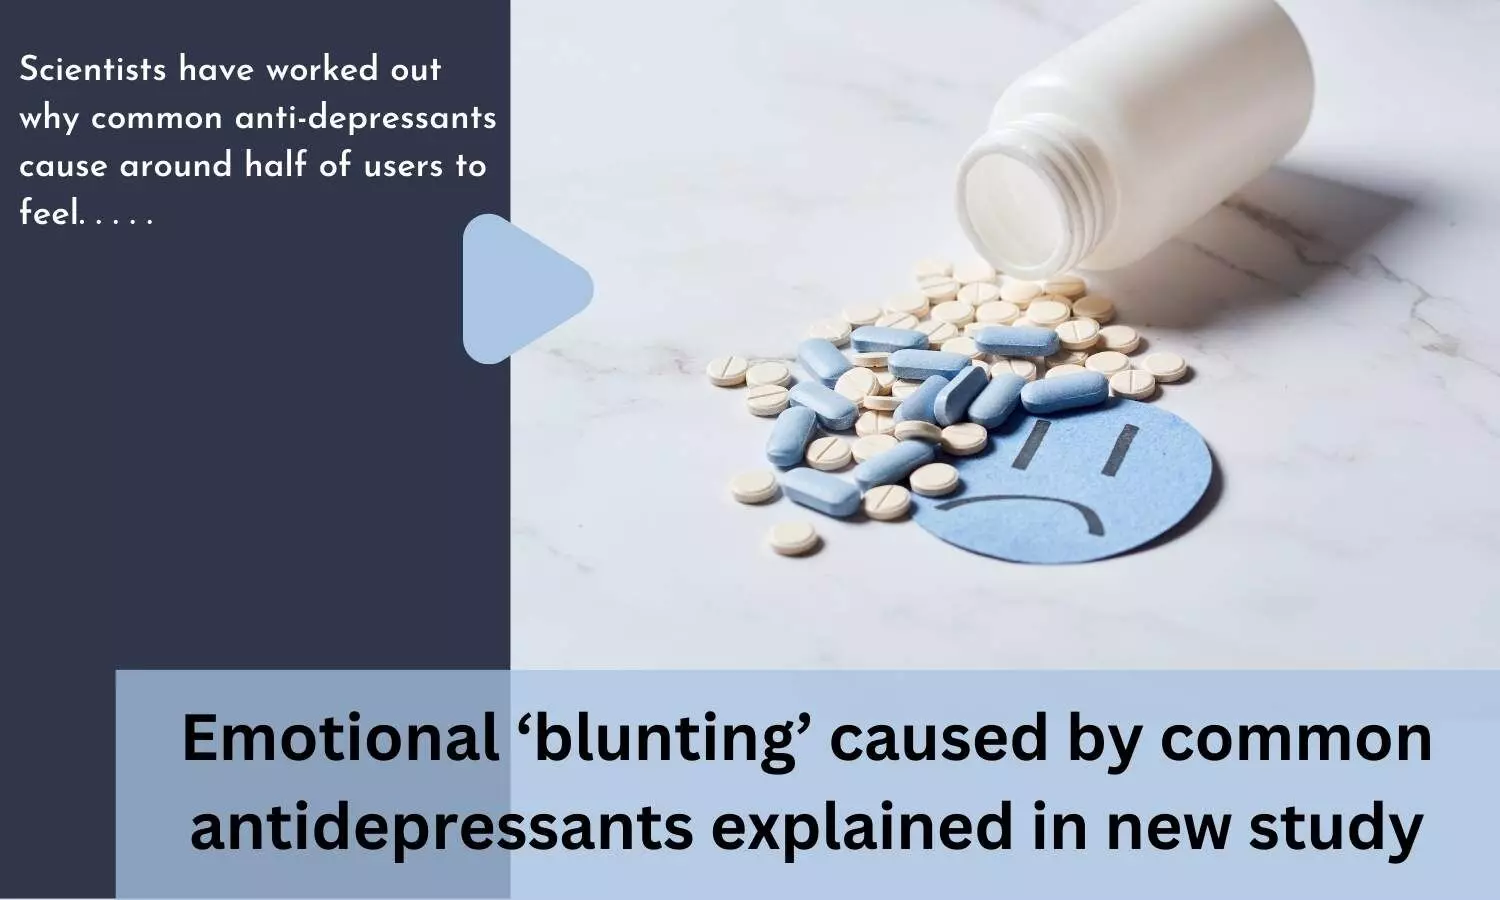 Emotional blunting caused by common antidepressants explained in new study